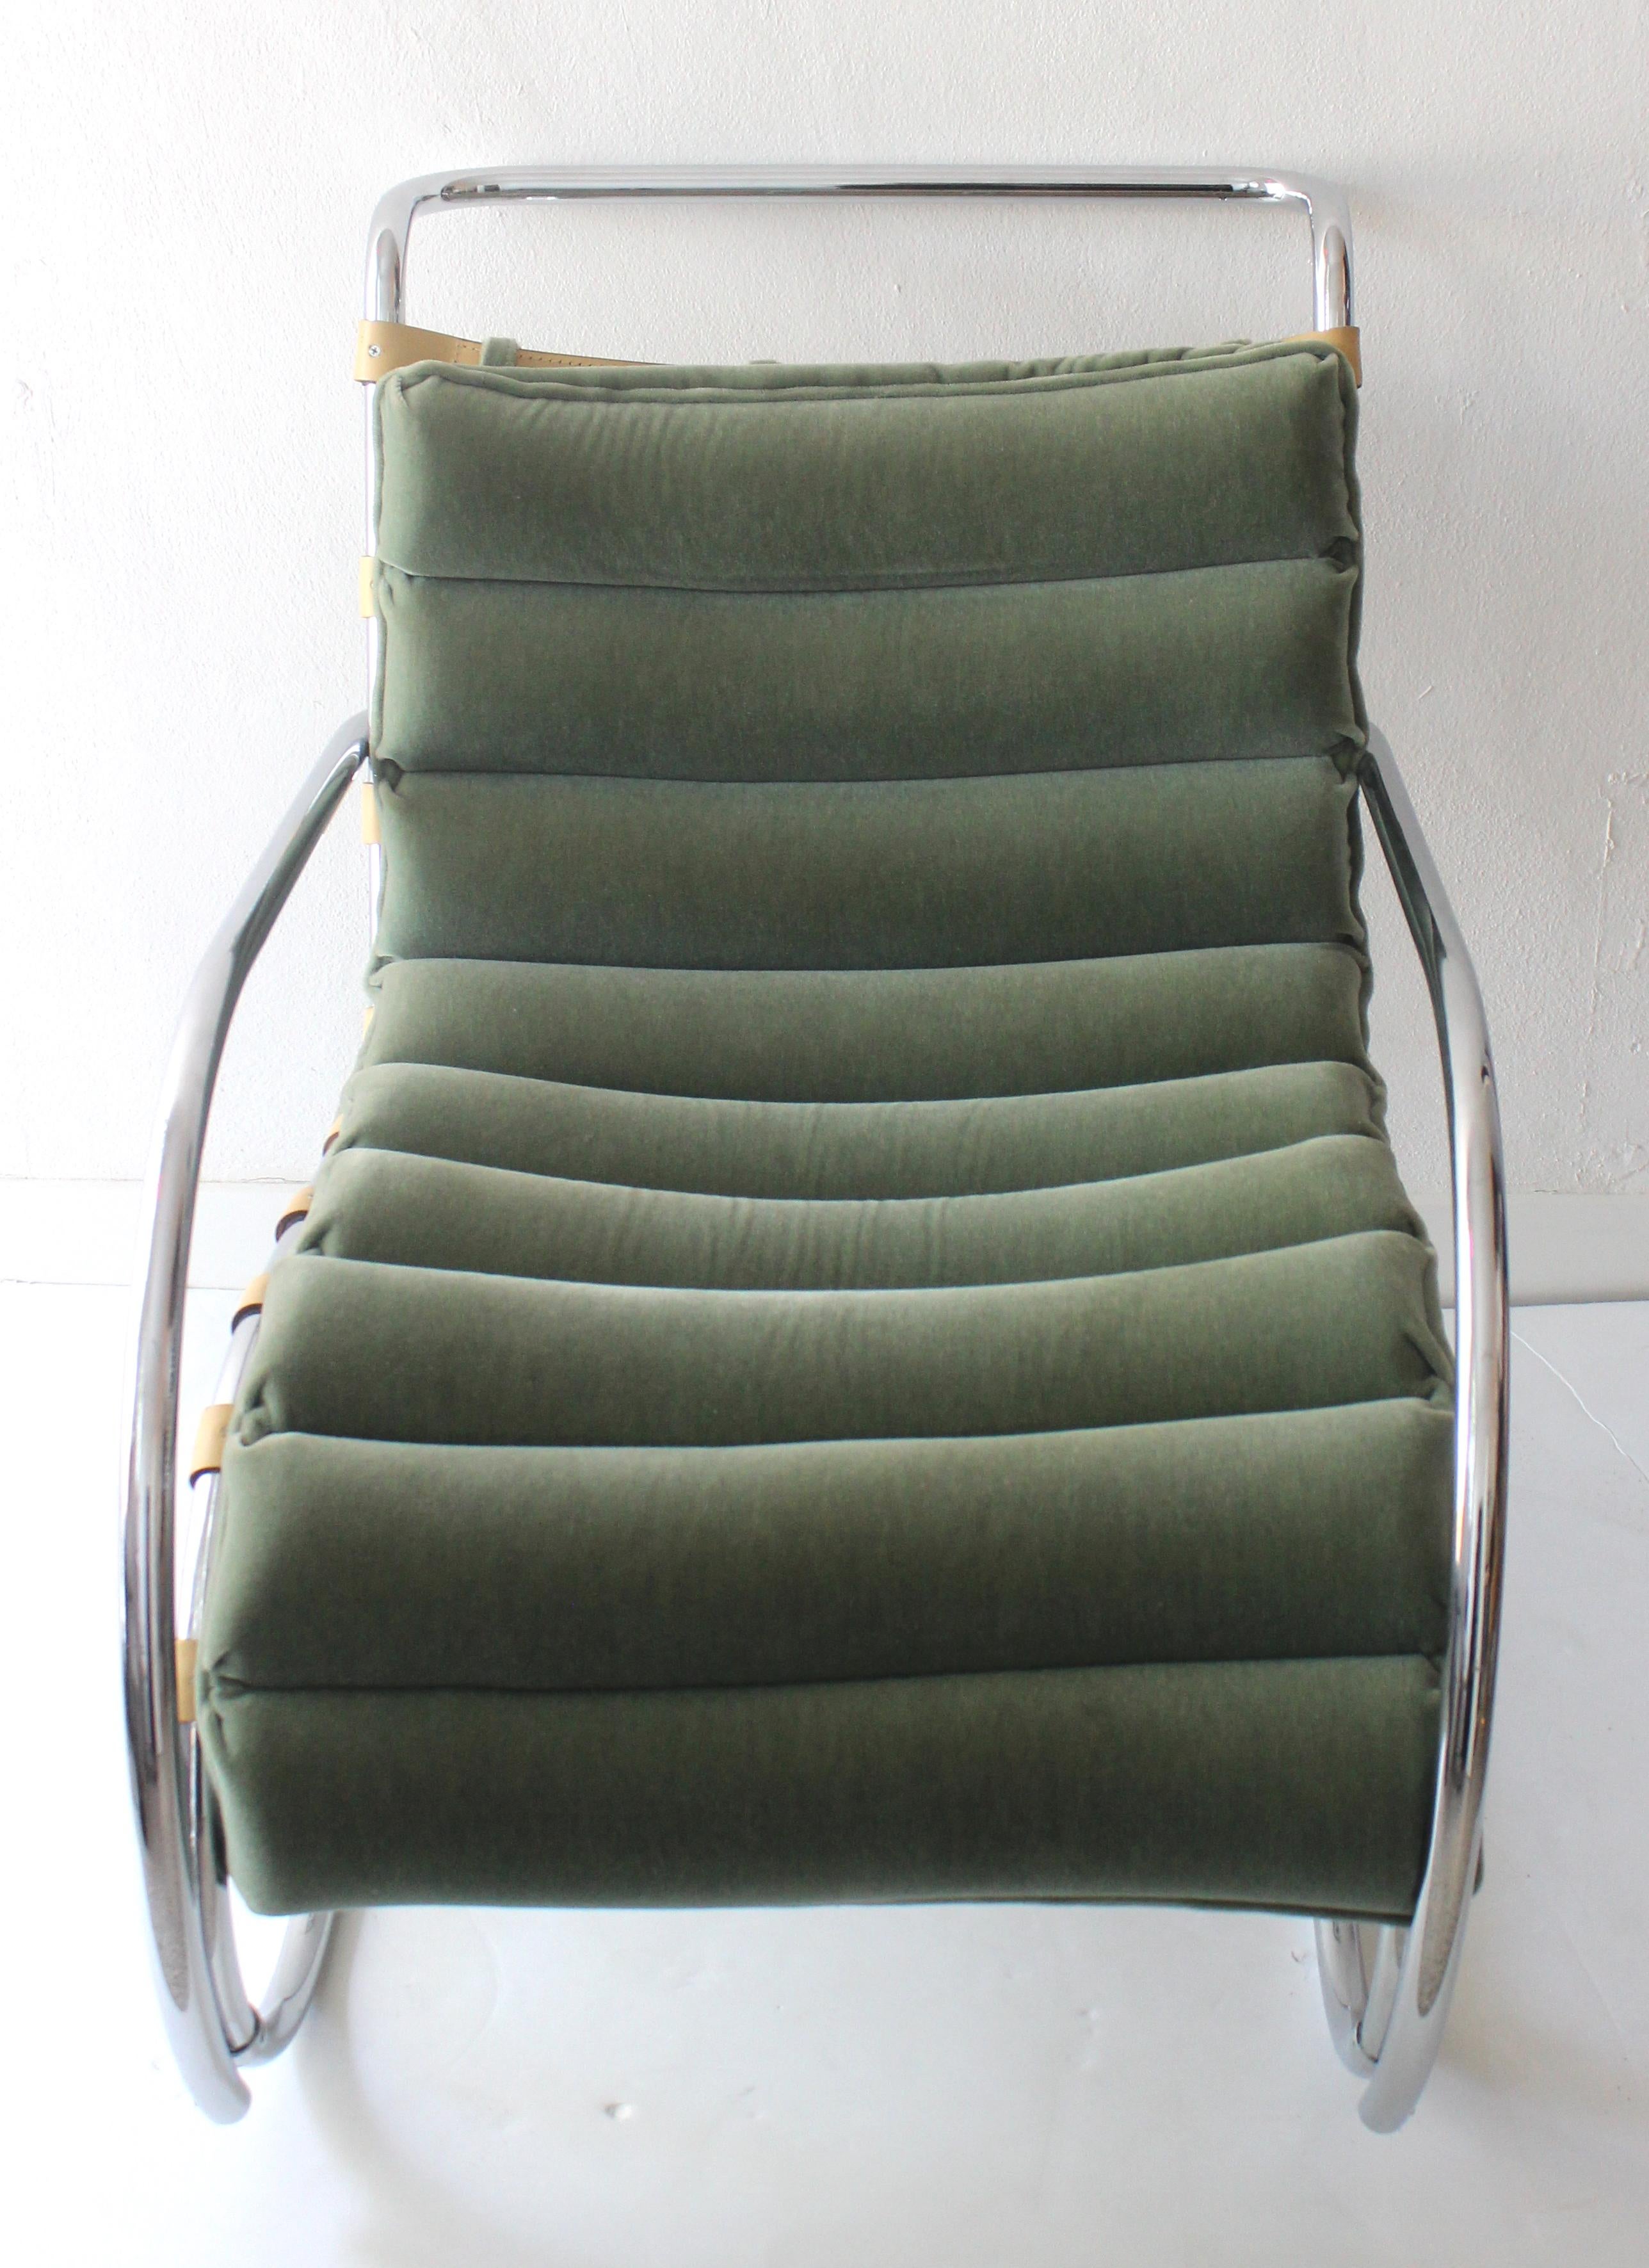 This Classic Mies van der Rohe (style) lounge chair will make for the perfect chair to pass the hours away in.

This piece is styled after the original that was created in 1927 and it was sold and imported by Gordon International, and was fabricated